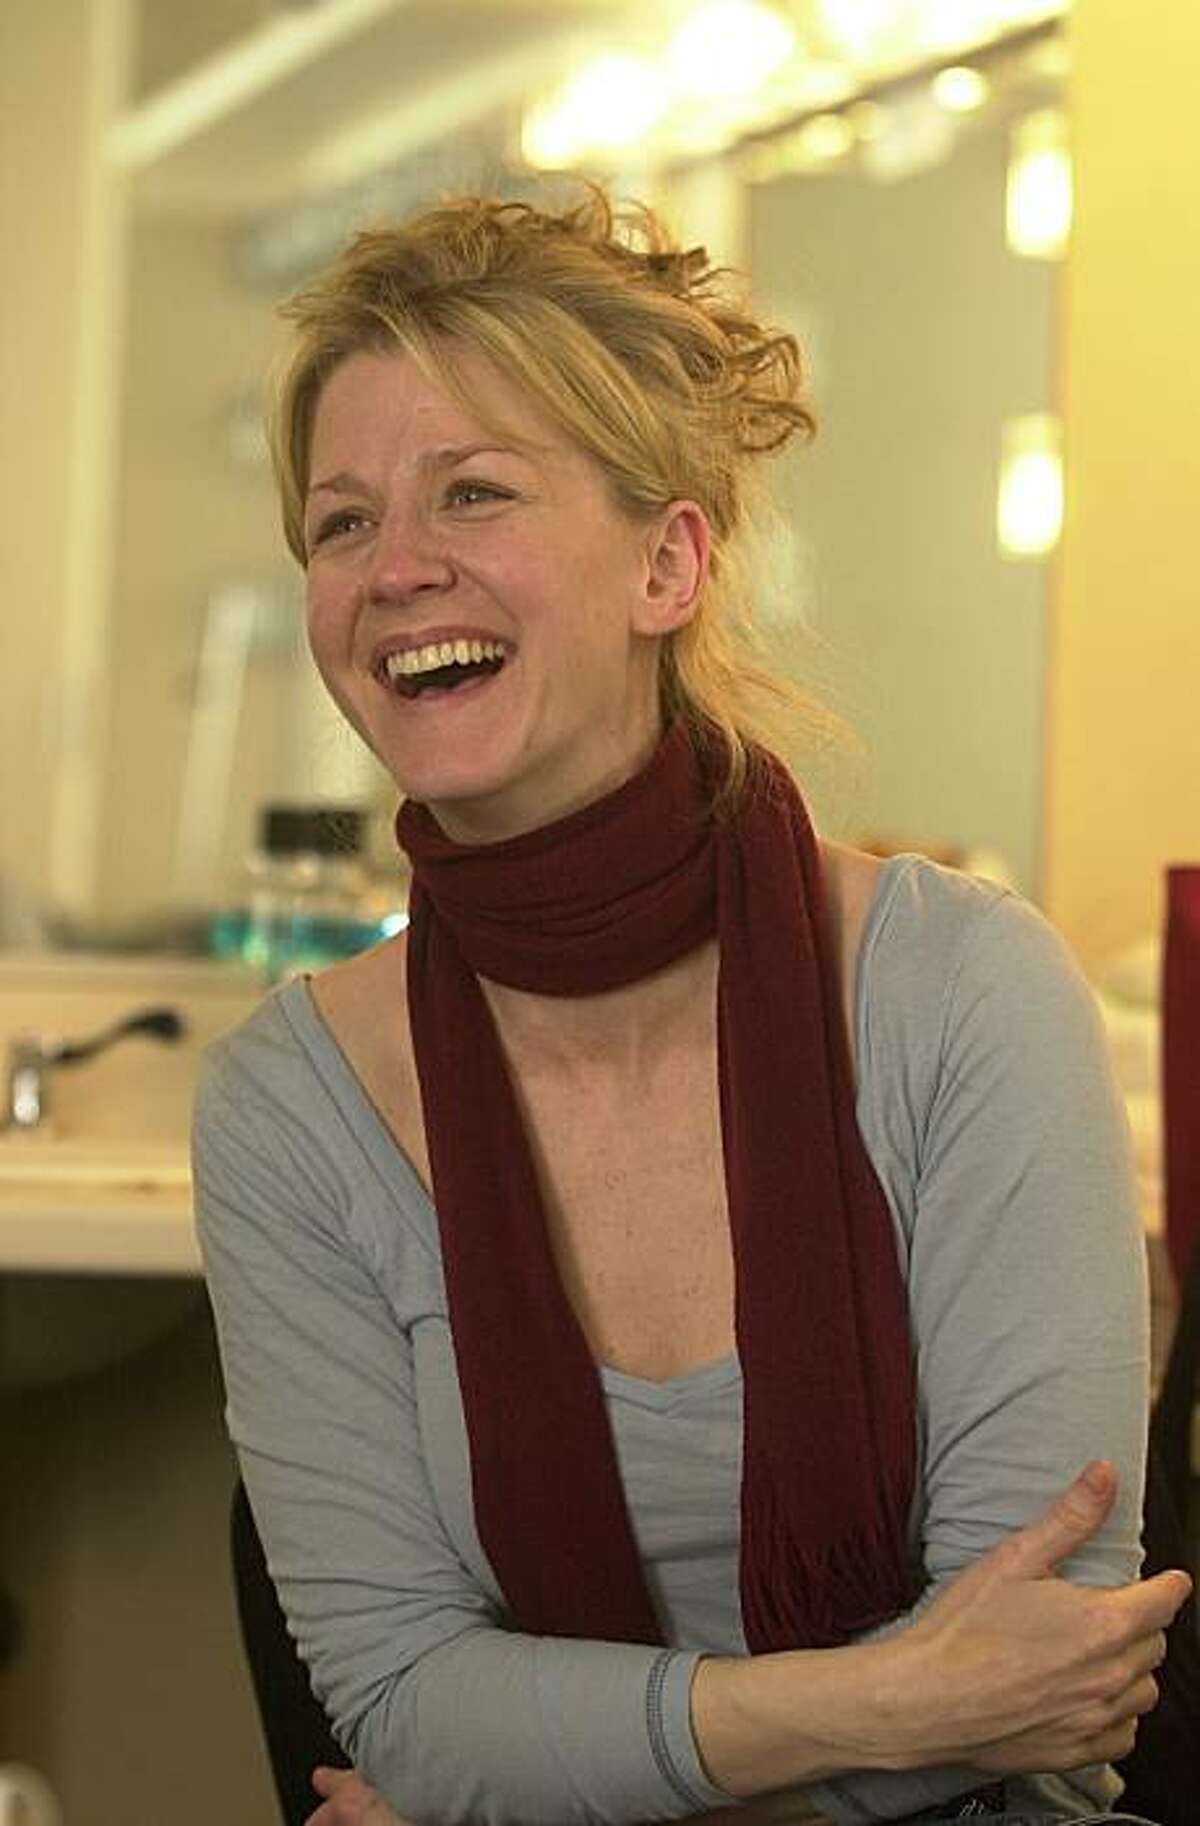 Rene Augensen, leading lady at ACT talks about her role in the Ibsen's protofeminist classic "A Doll's House", in her dressing room at the theater, Jan.13, 2004, in San Francisco.